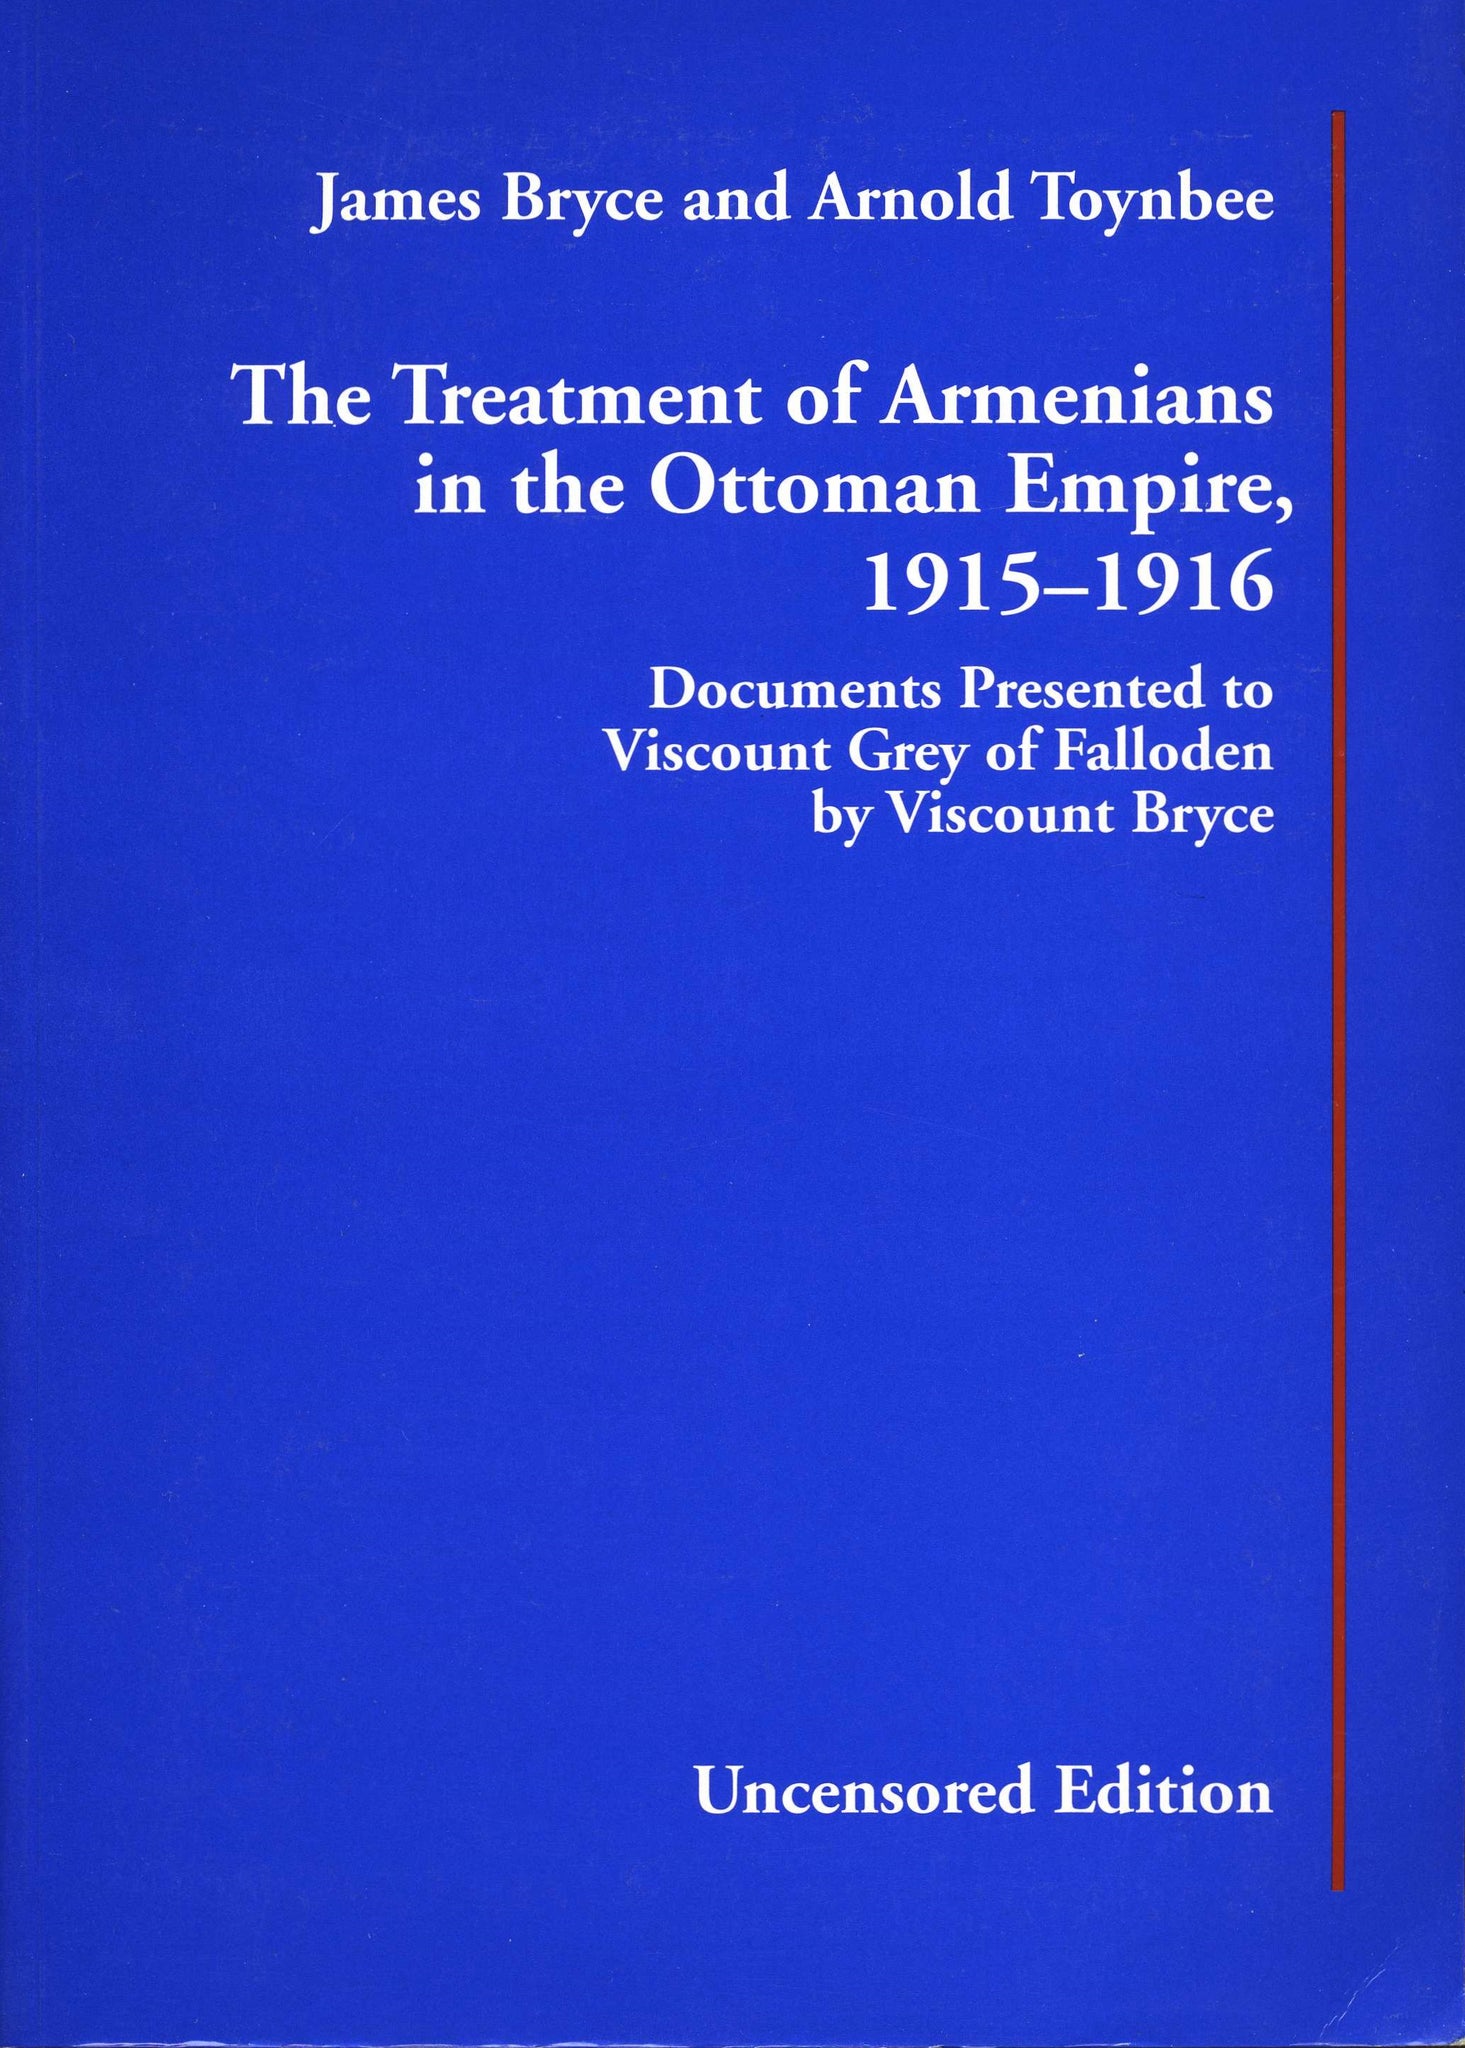 TREATMENT OF THE ARMENIANS IN THE OTTOMAN EMPIRE, 1915-1916, The